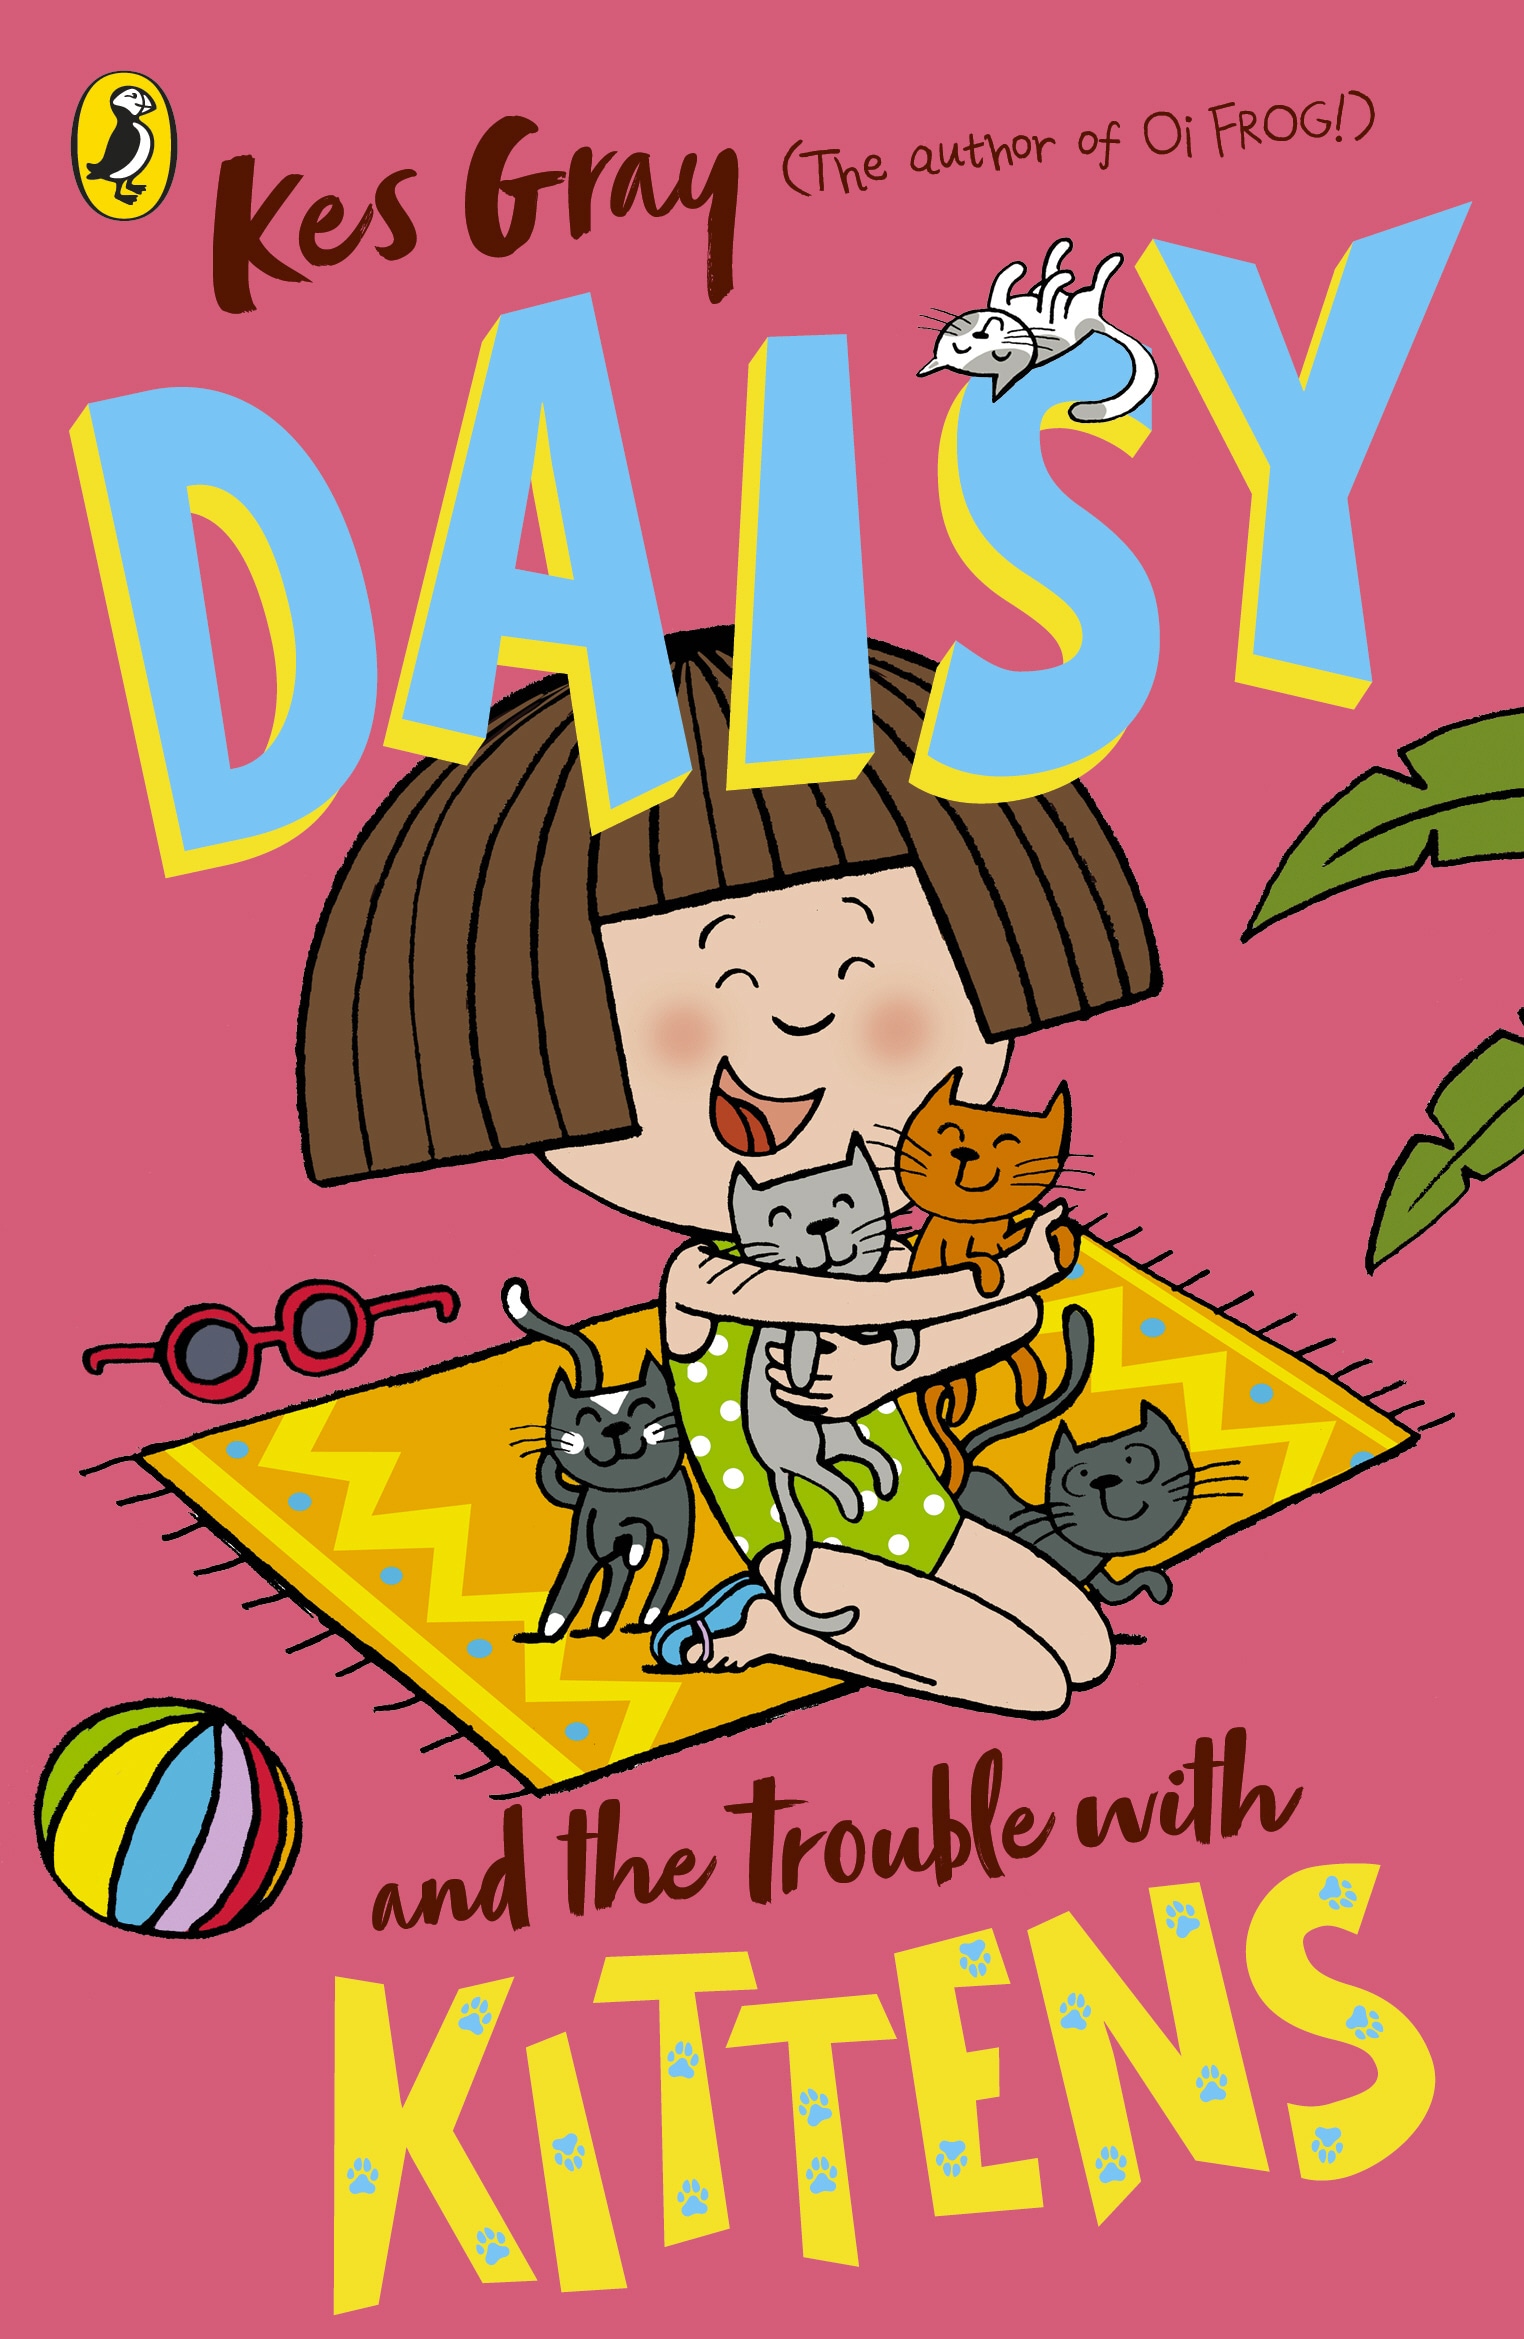 Book “Daisy and the Trouble with Kittens” by Kes Gray — August 6, 2020